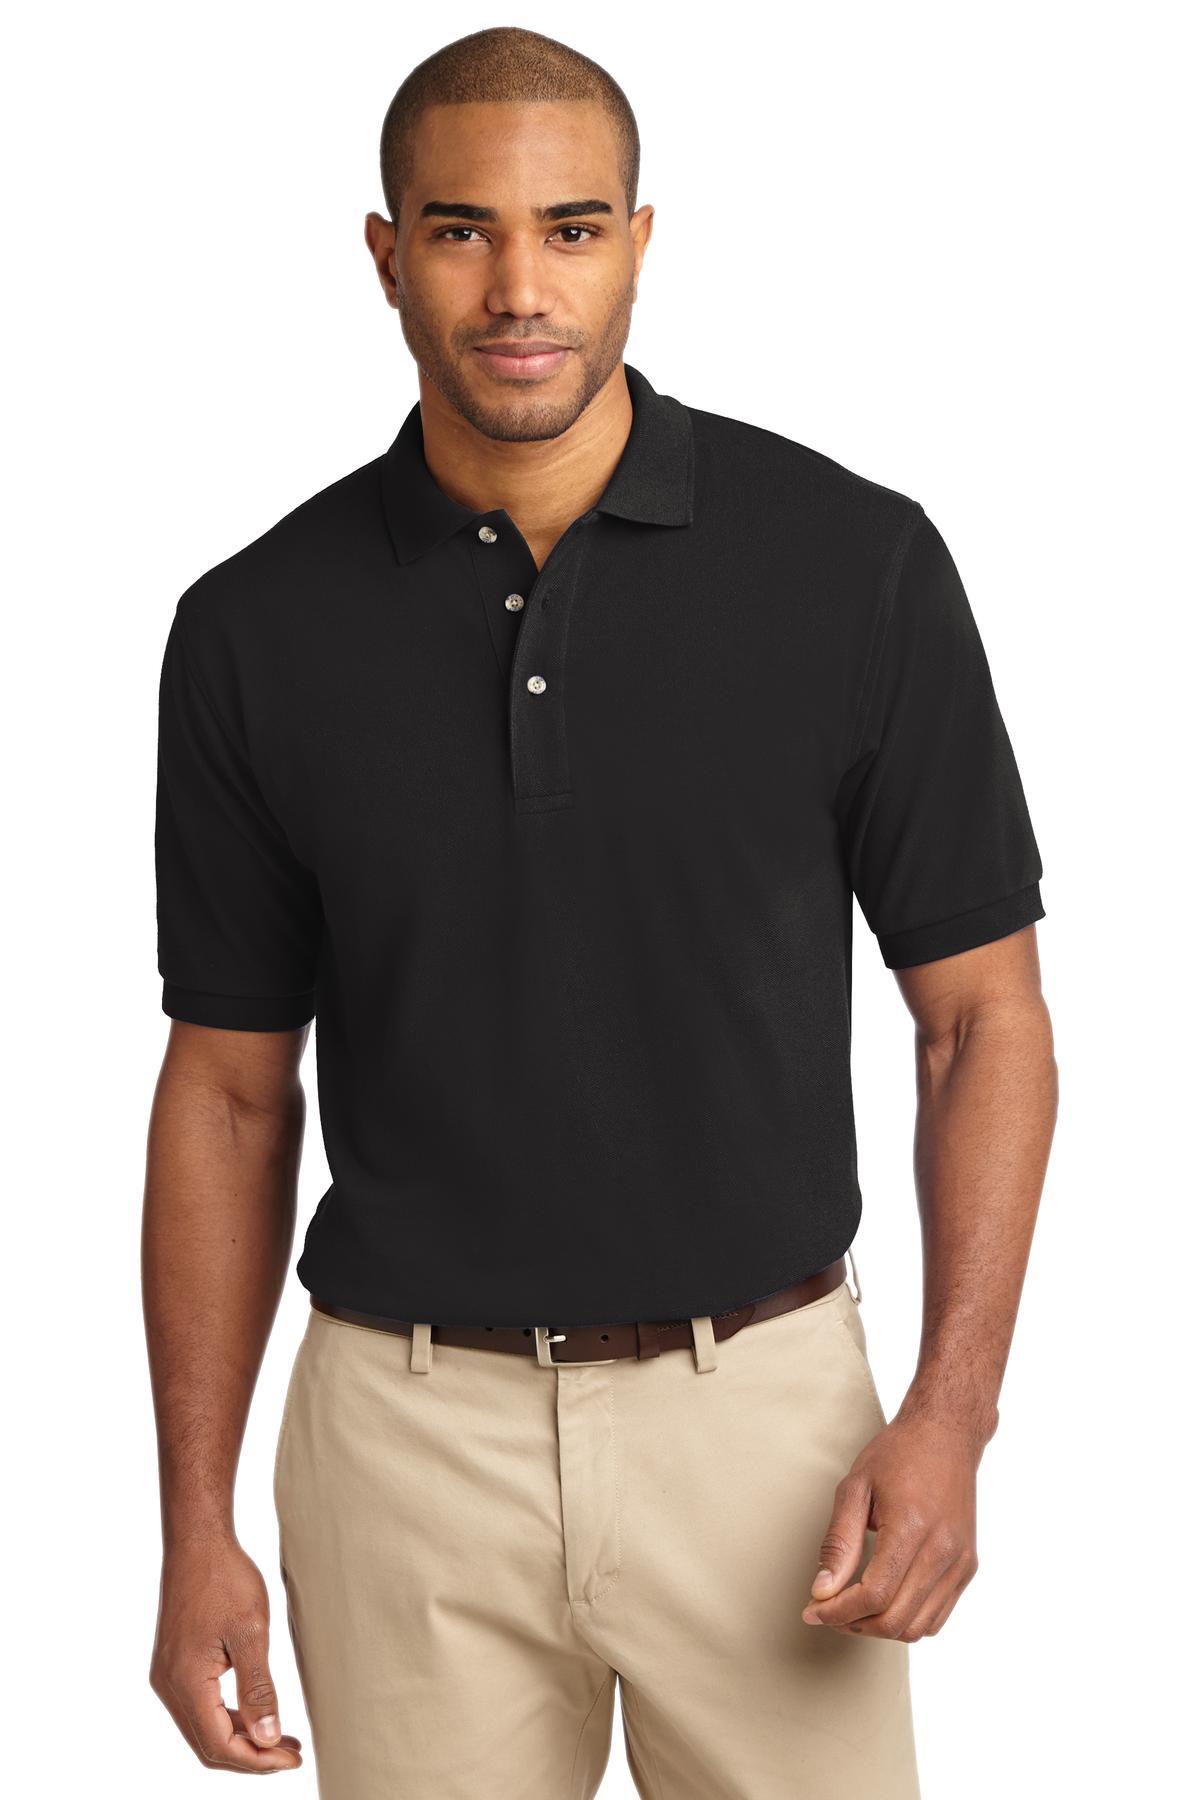 Port Authority Tall Heavyweight Cotton Pique Polo. TLK420 - Dresses Max